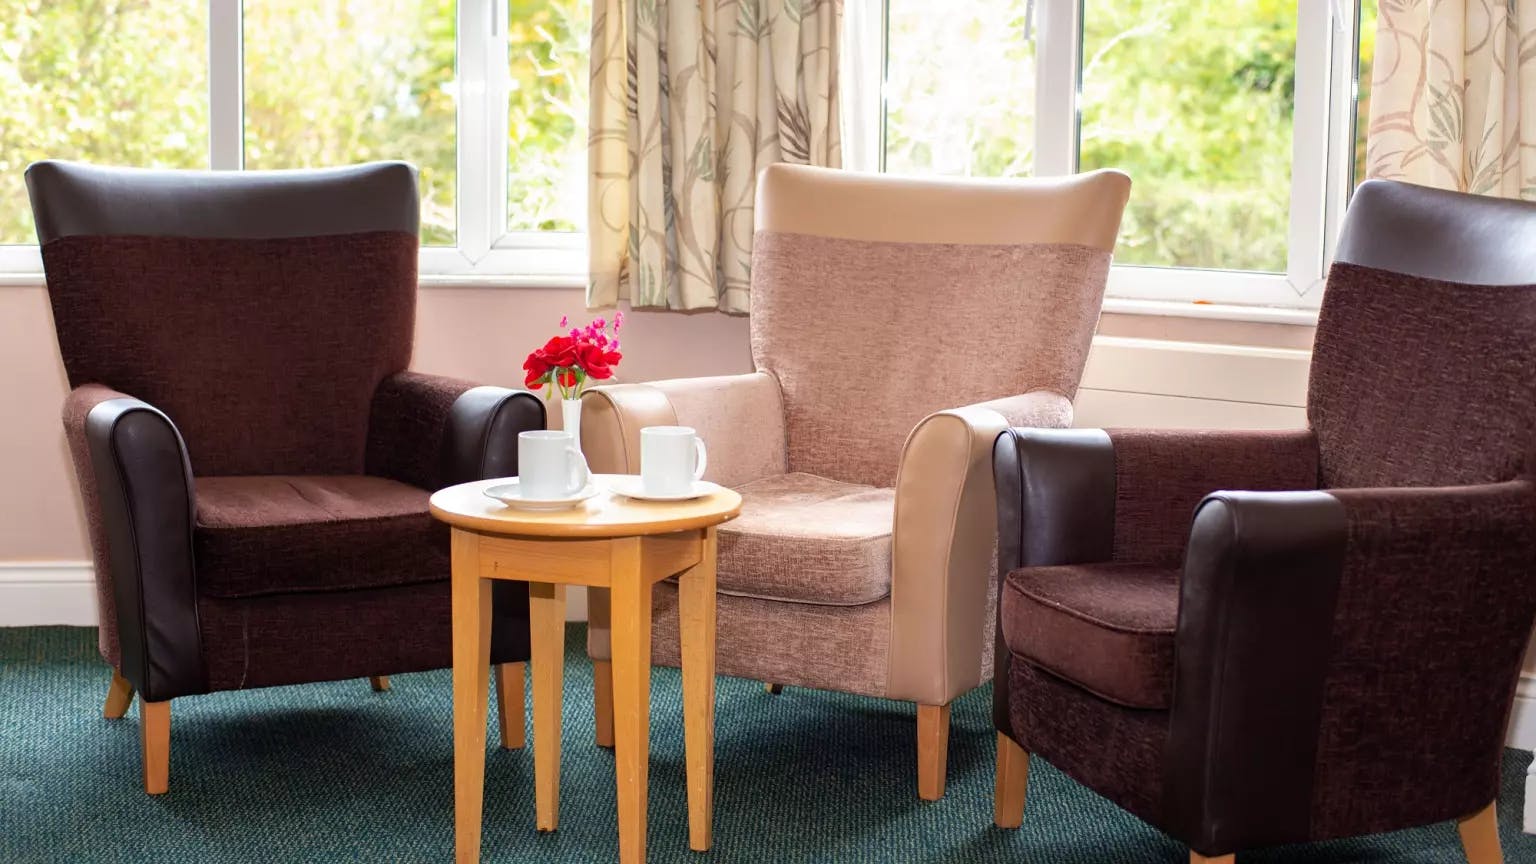 Lounge of Pinewood Lodge care home in Watford, Hertfordshire